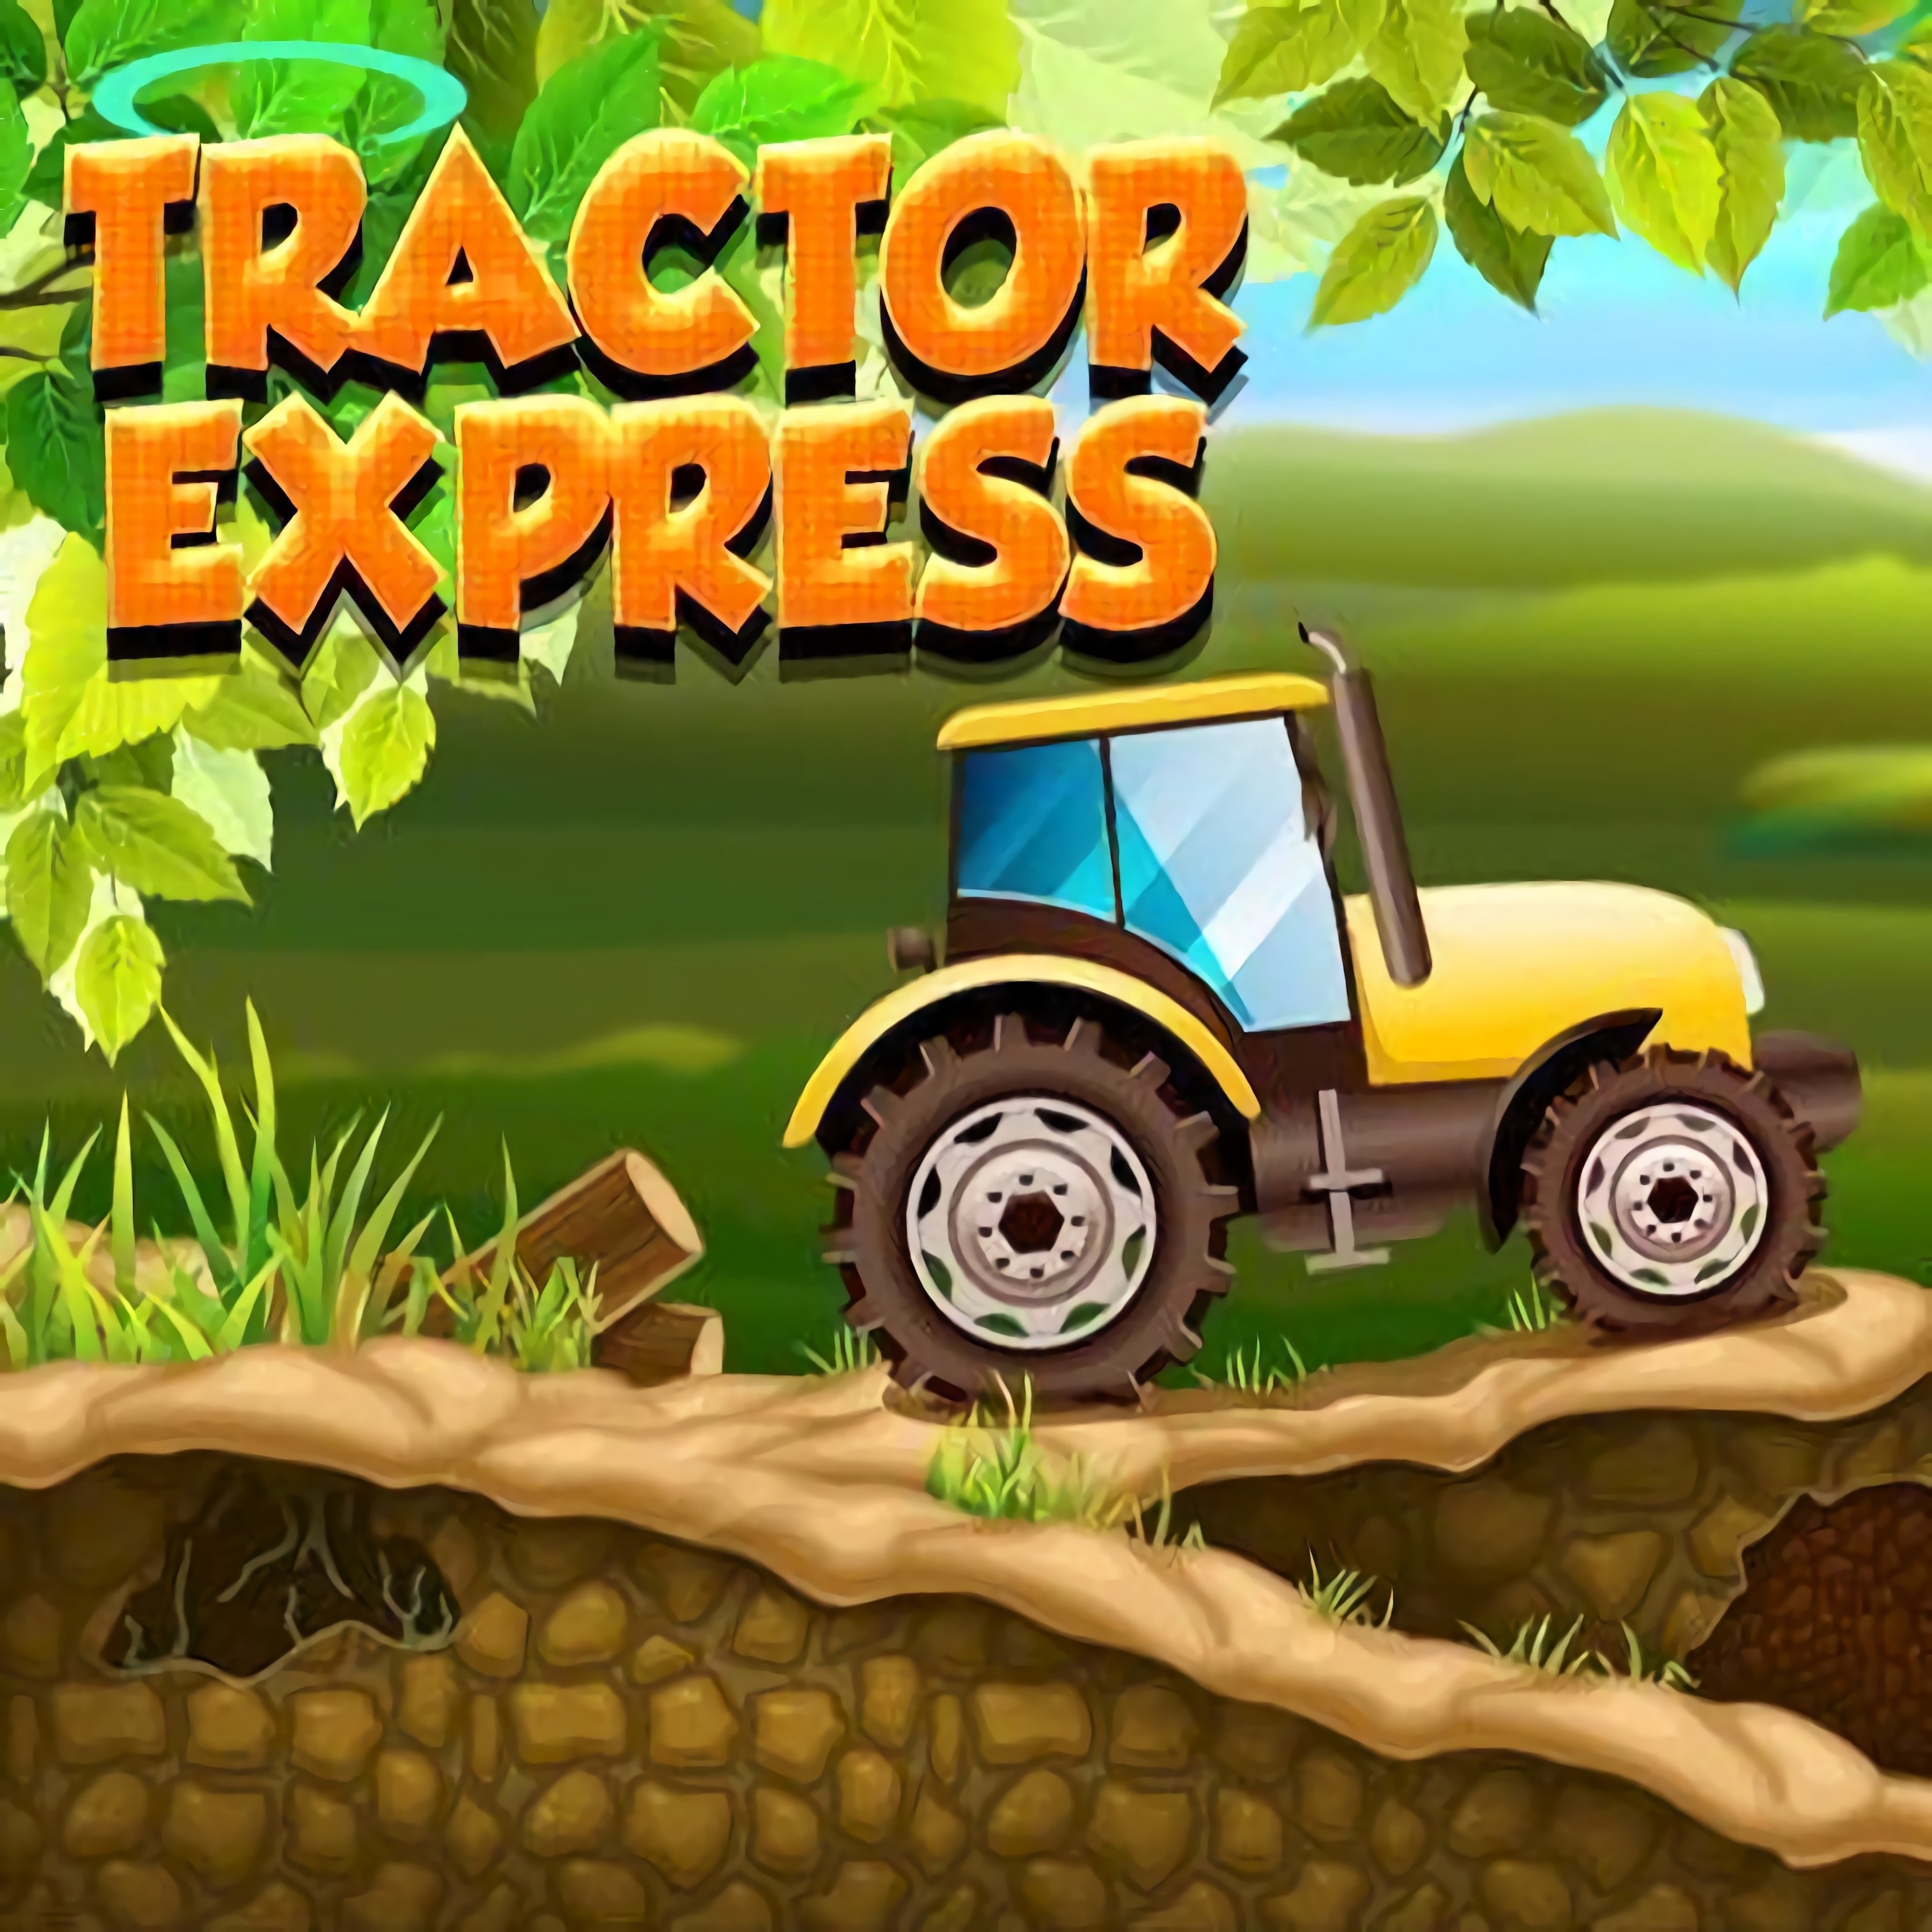 Tractor Express game play at 